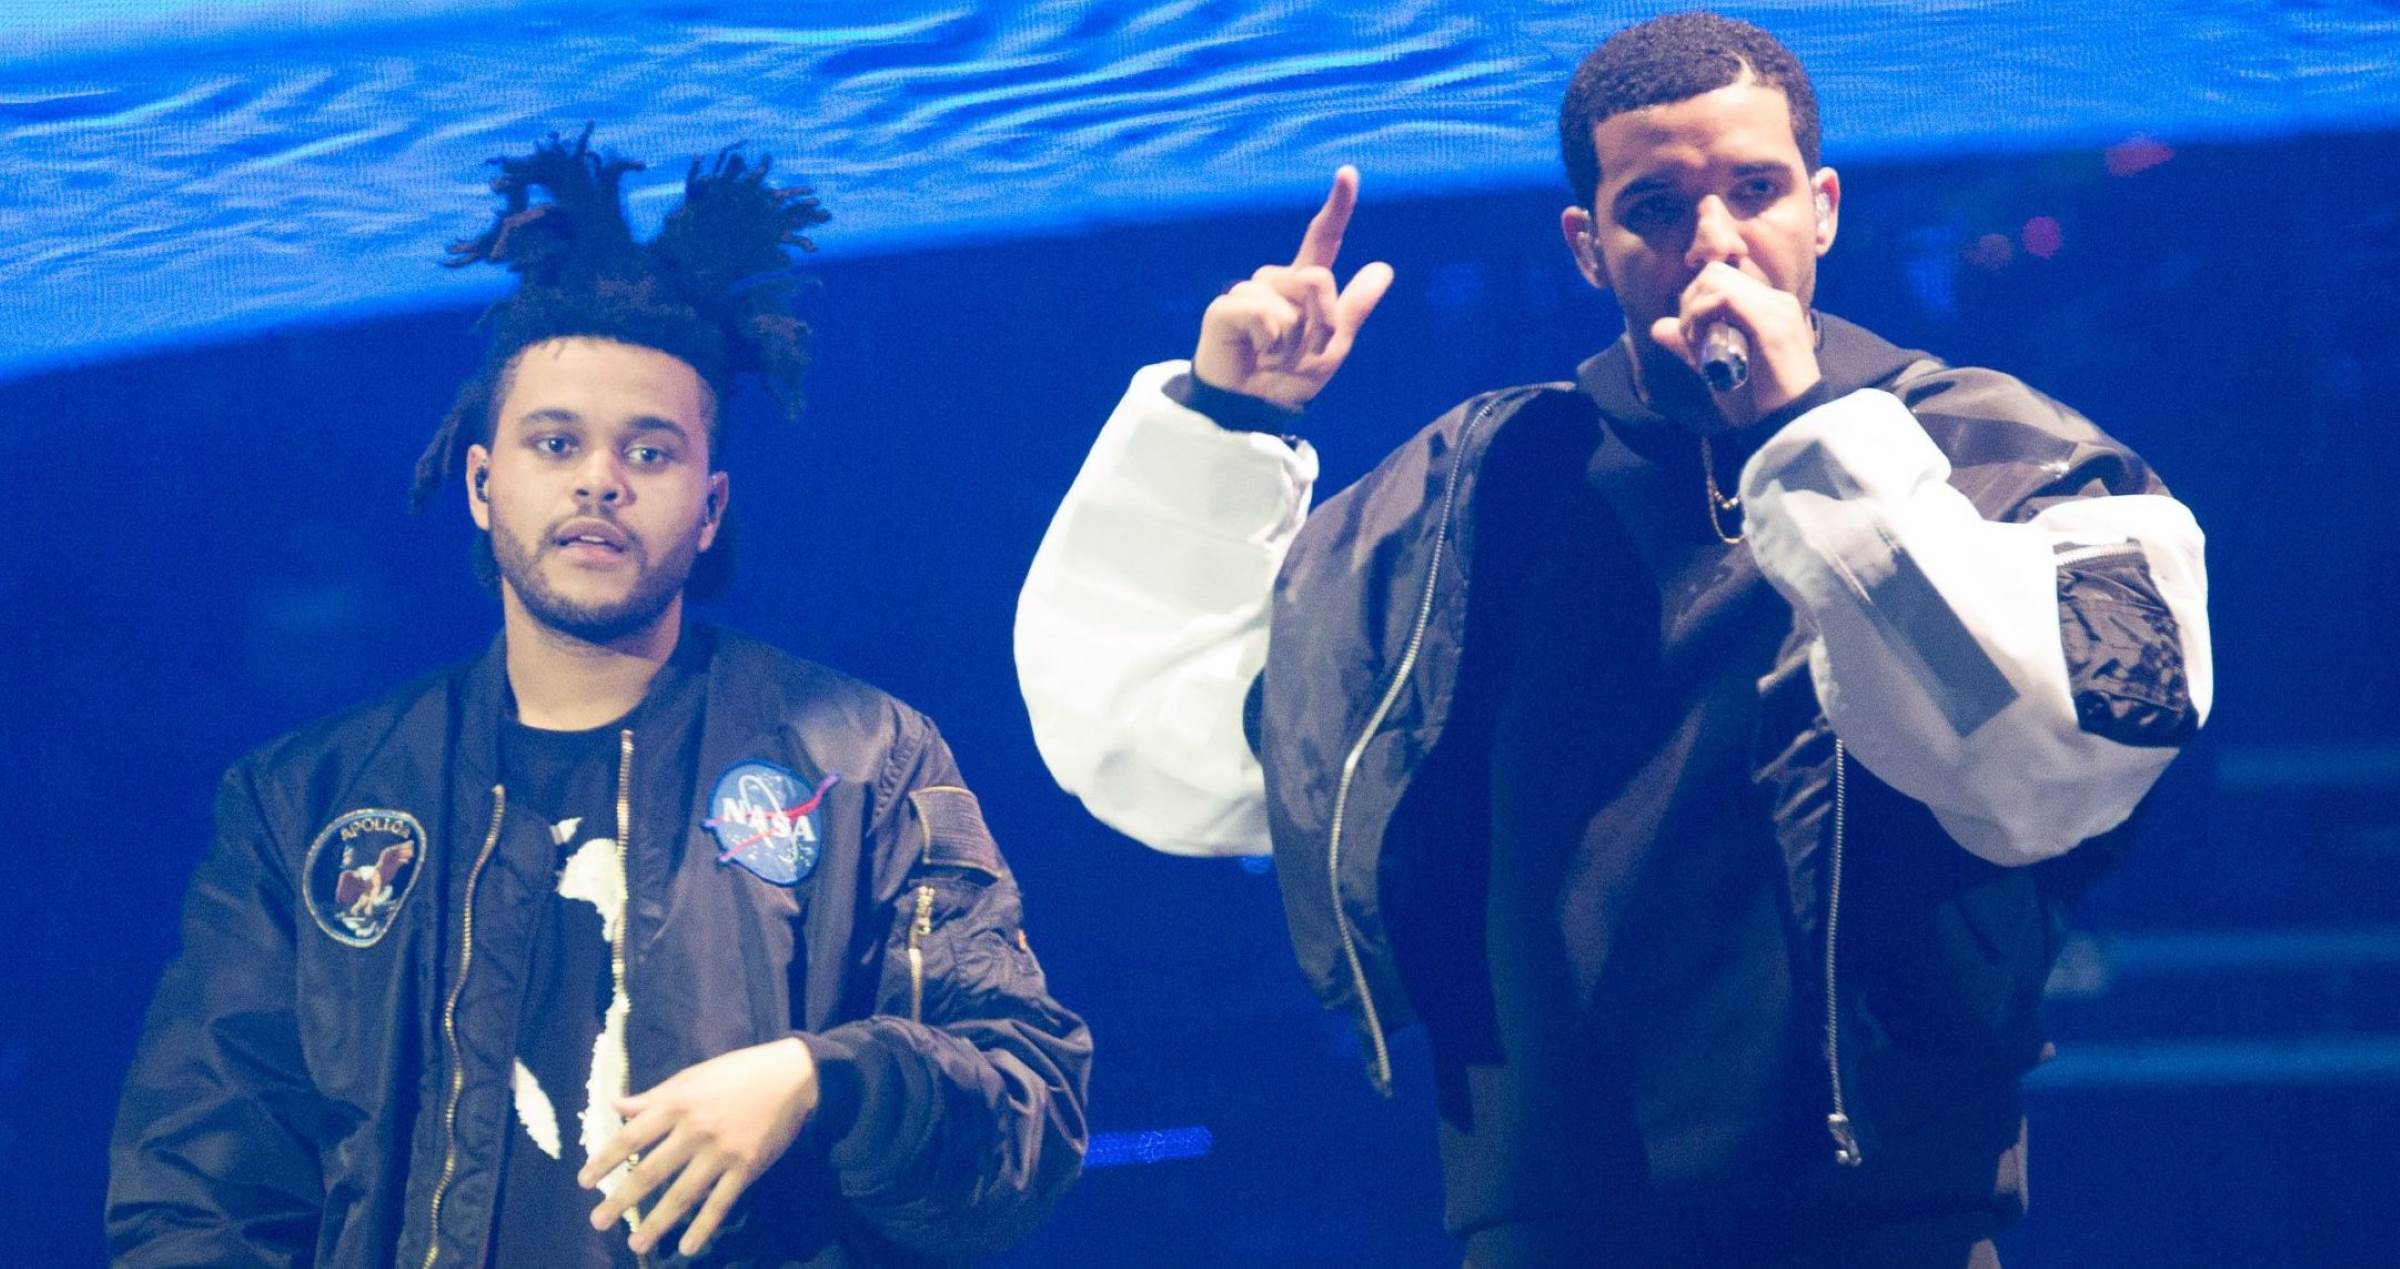 grammy-eligibility-ai-drake-and-the-weeknd-collab-could-score-a-win-says-recording-academy-ceo